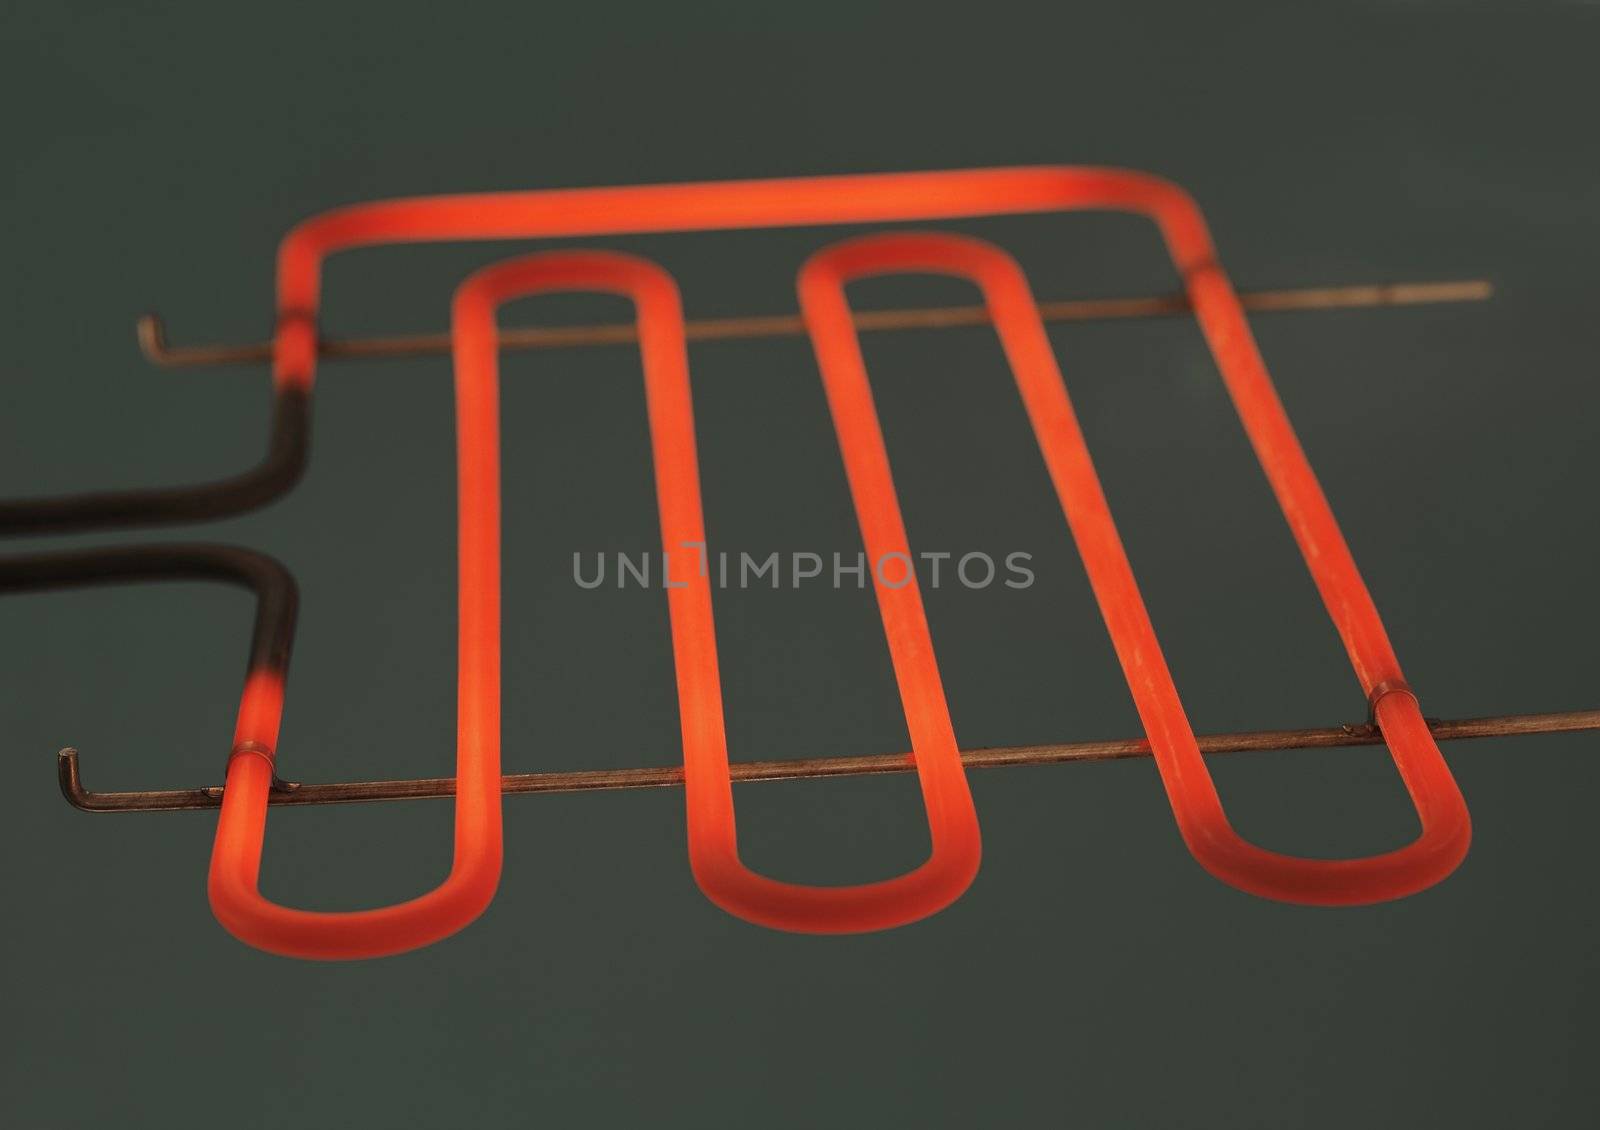 Heating element by Stocksnapper